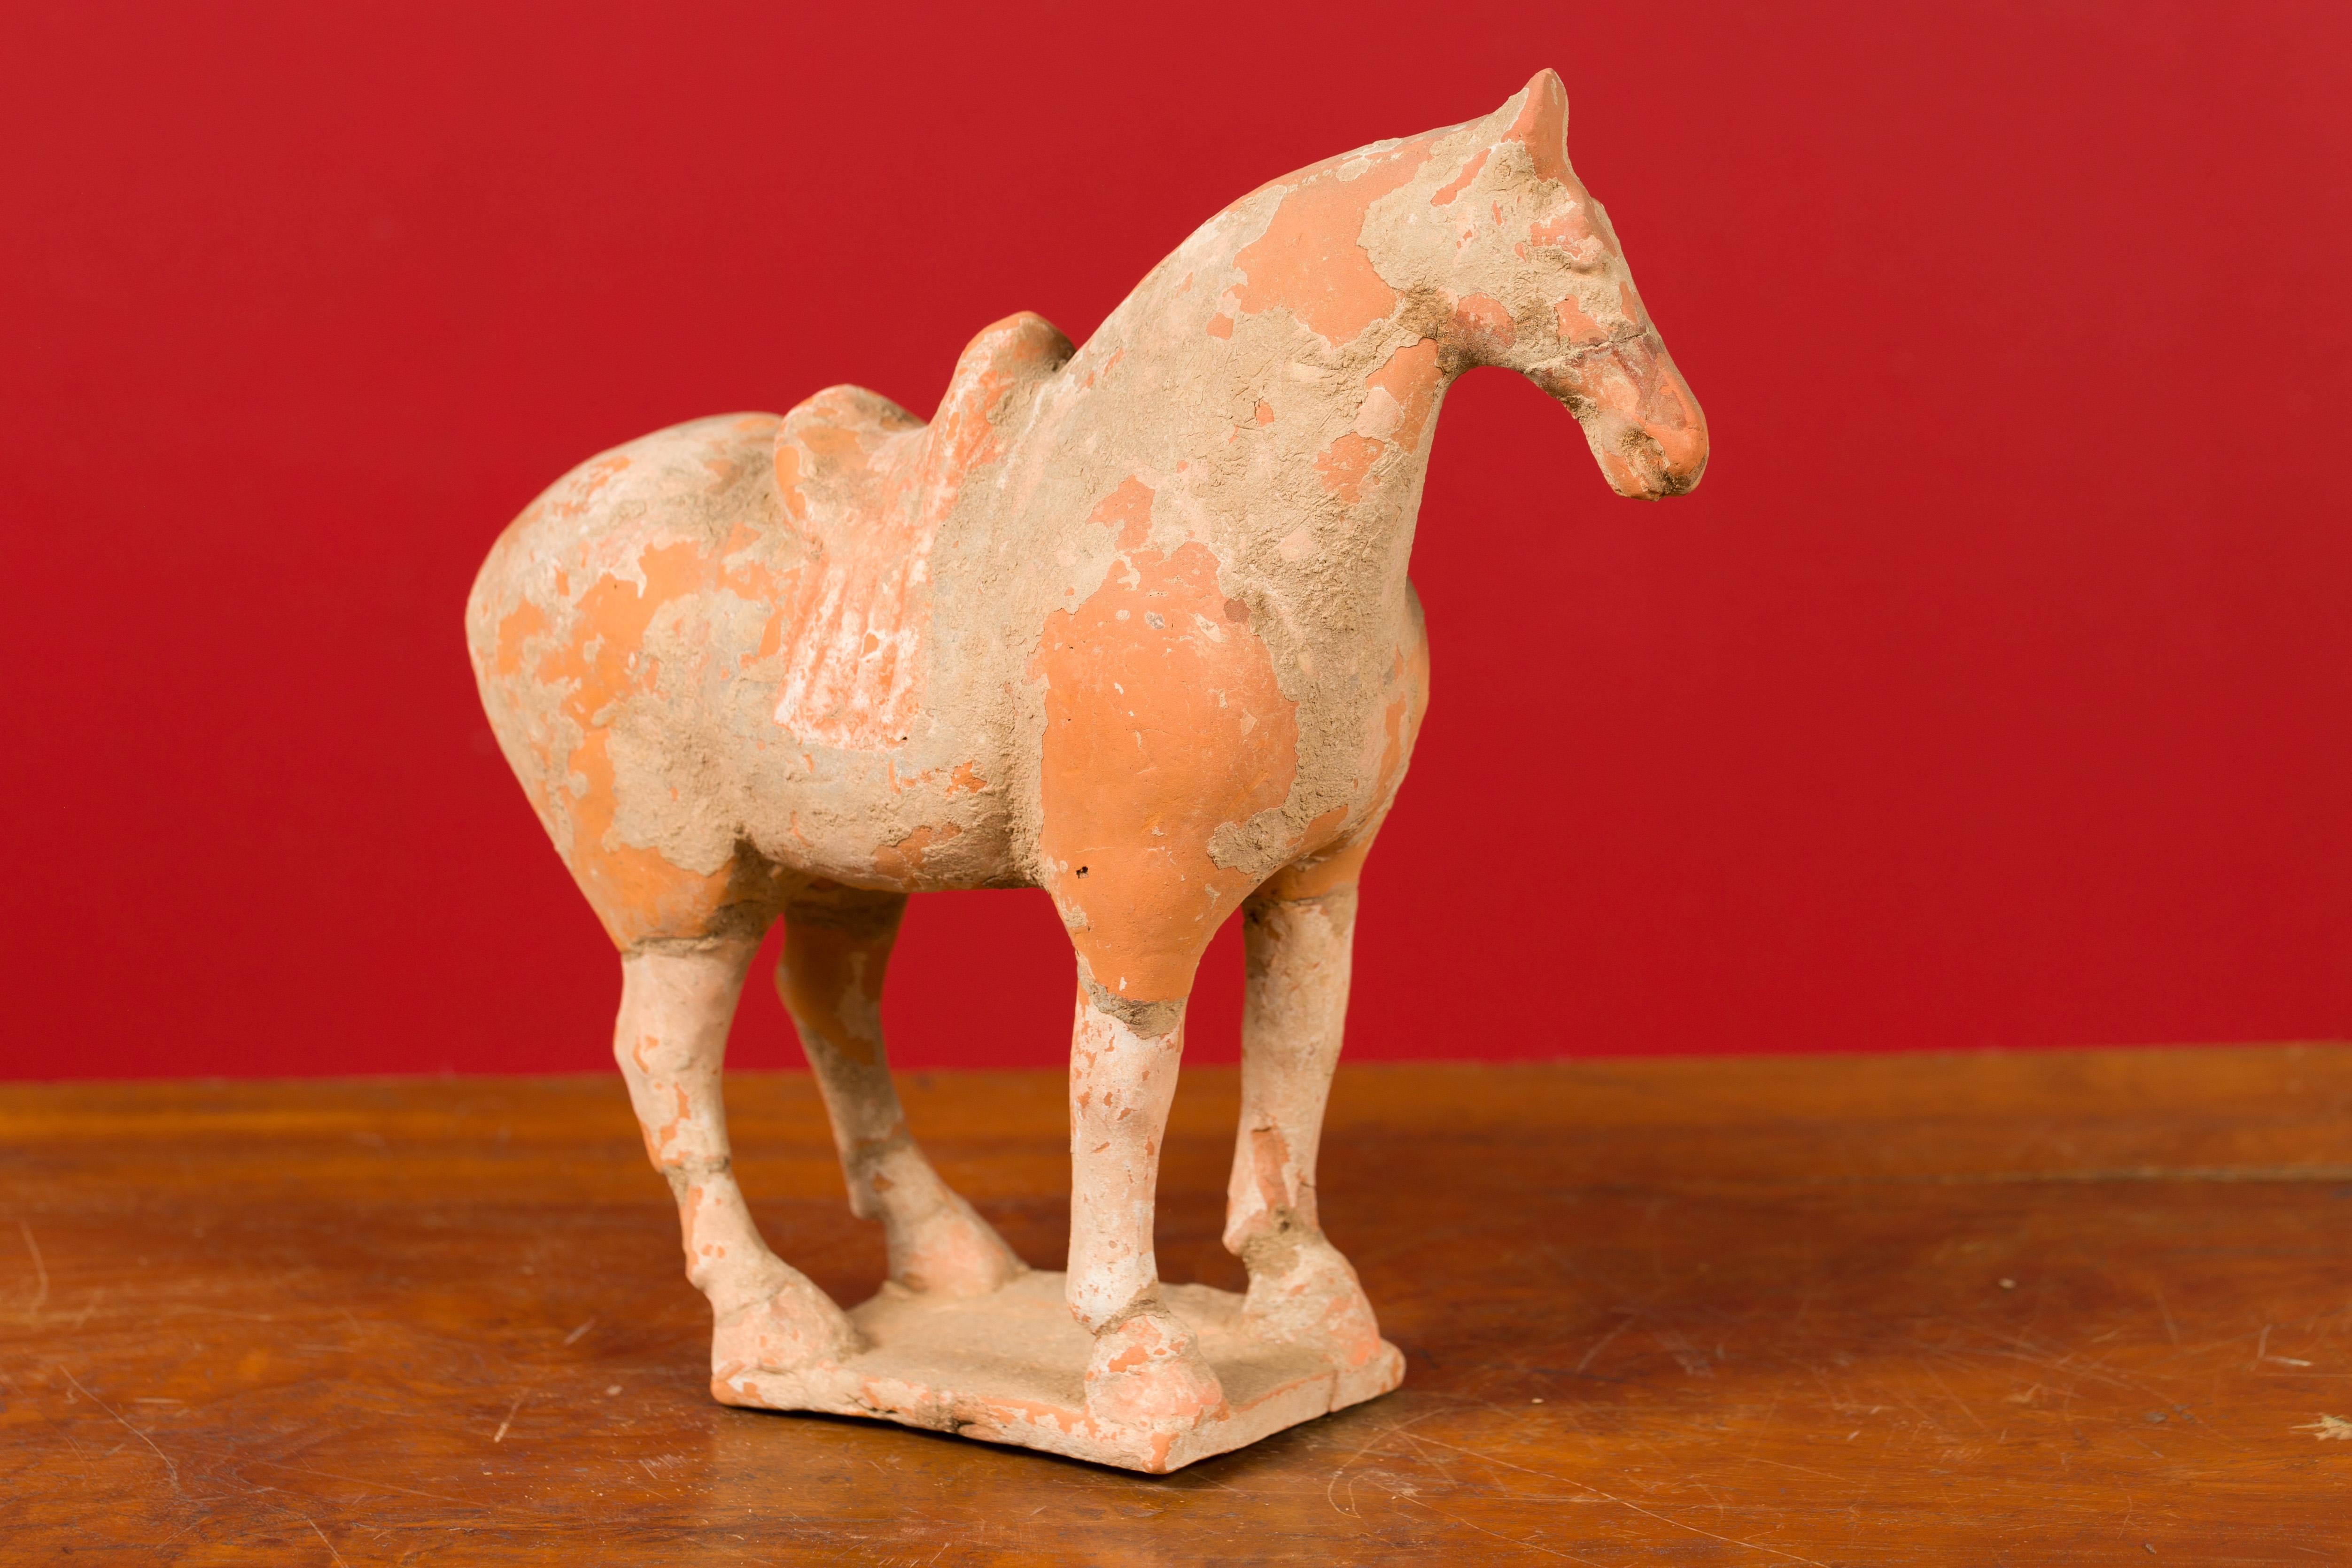 Chinese Han Dynasty Period Mingqi Terracotta Horse with Original Pigmentation 3